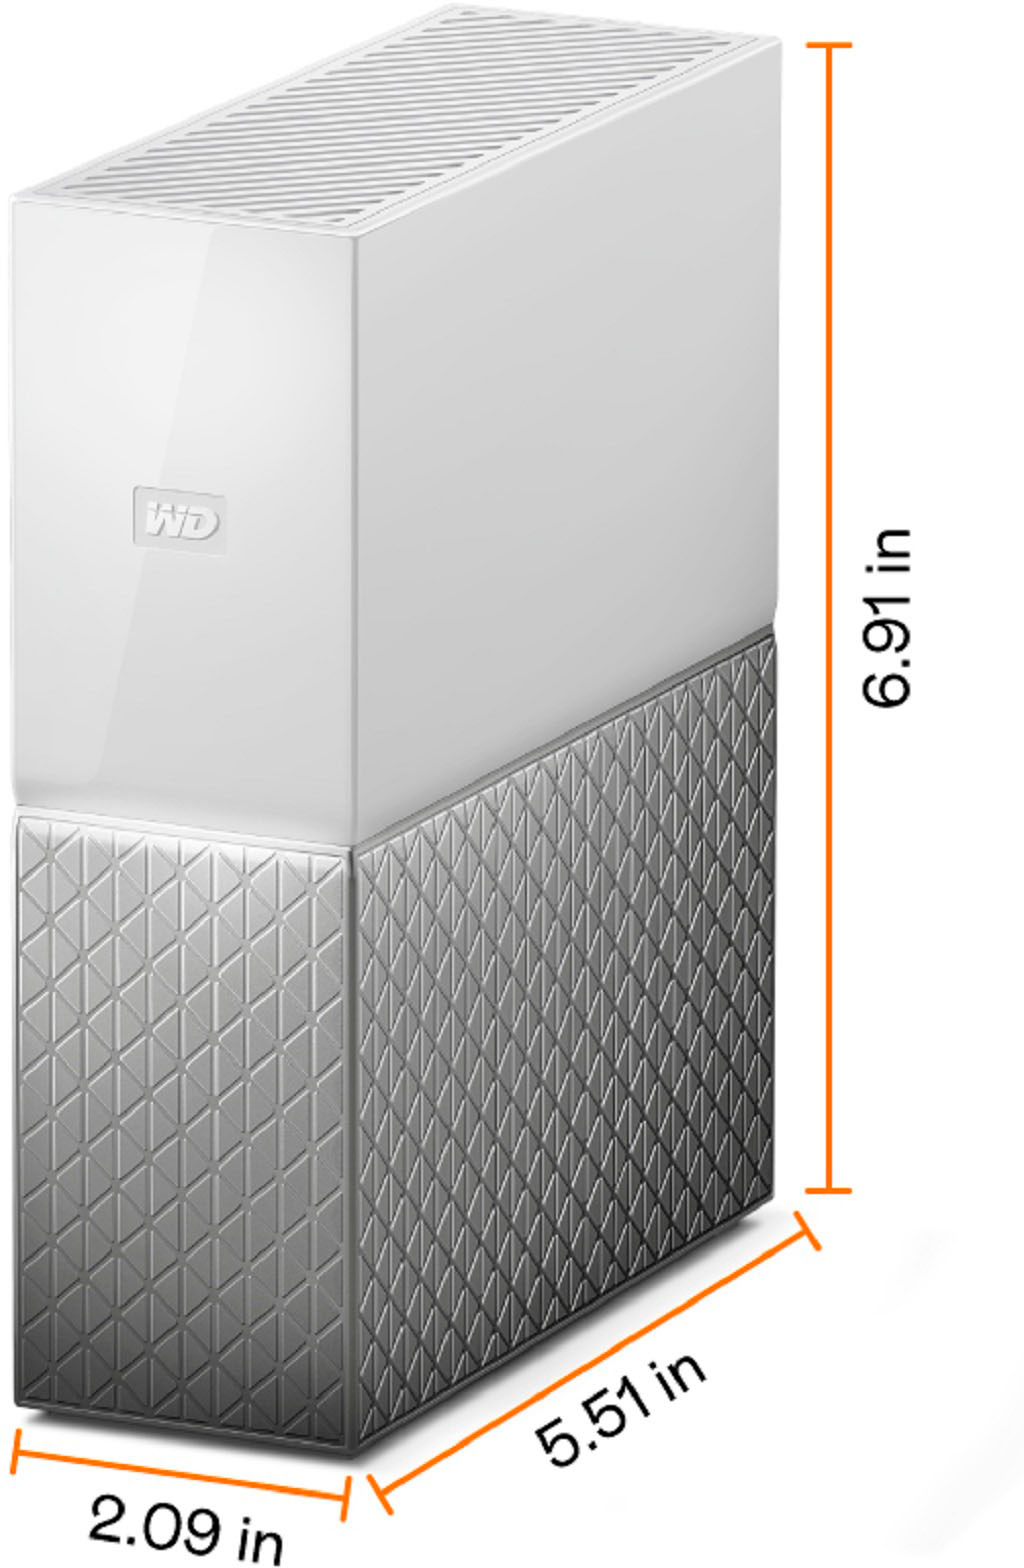 Angle View: Seagate - IronWolf 4TB Internal SATA NAS Hard Drive with Rescue Data Recovery Services